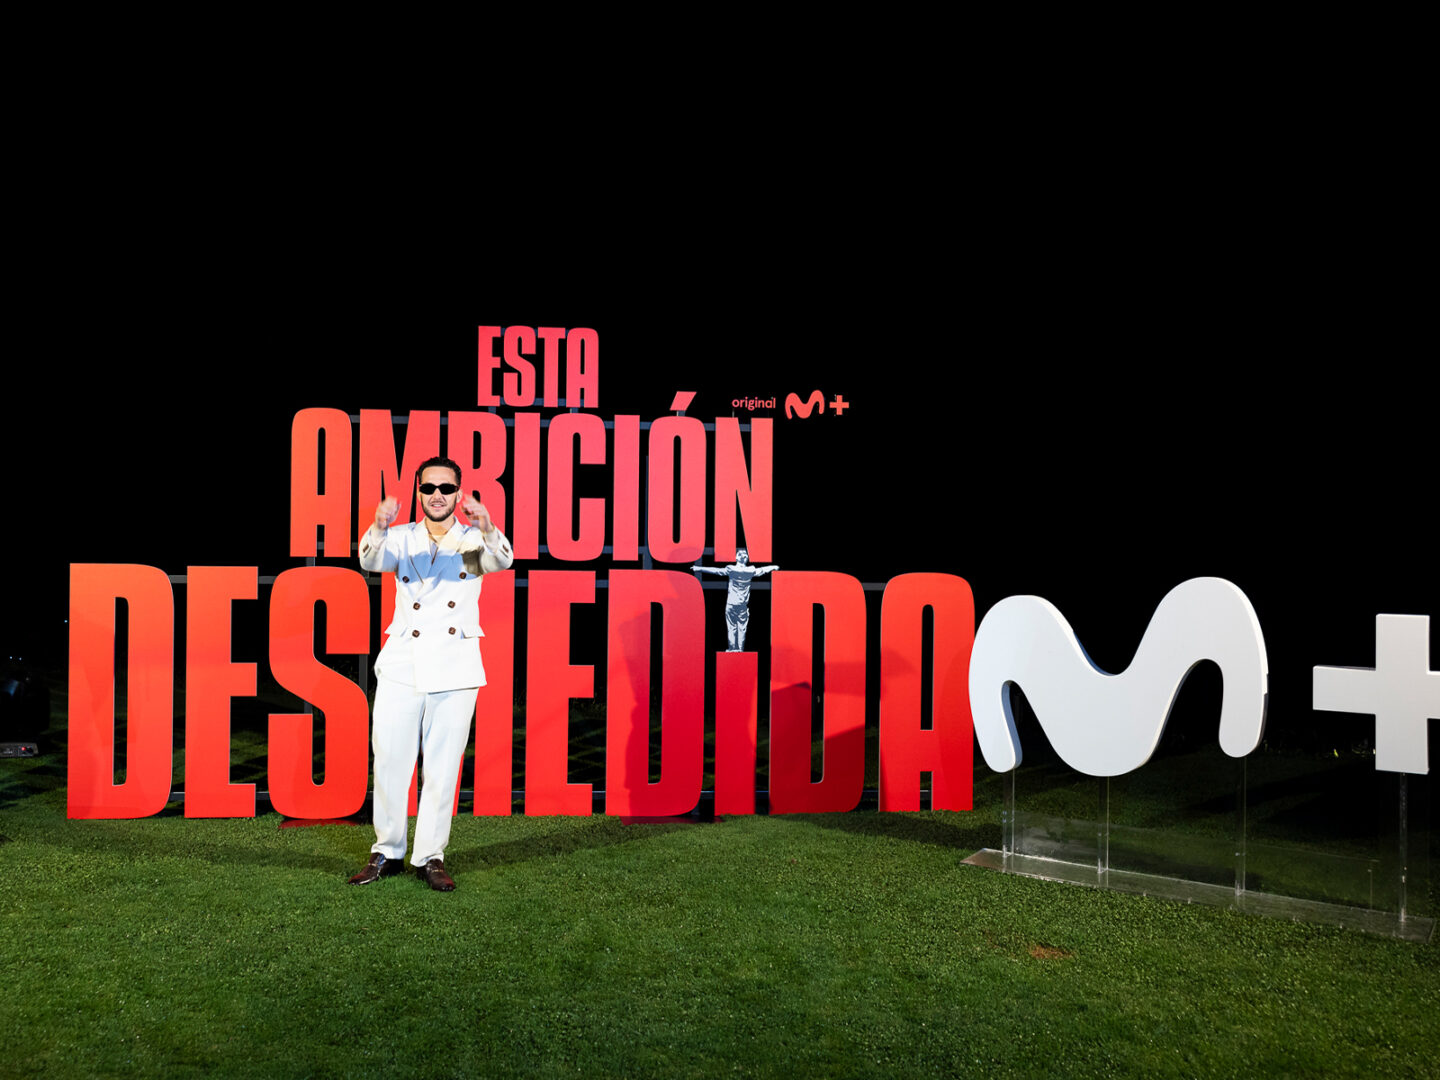 This is what happened at the after-party for the premiere of ‘Esta ambición desmedida’